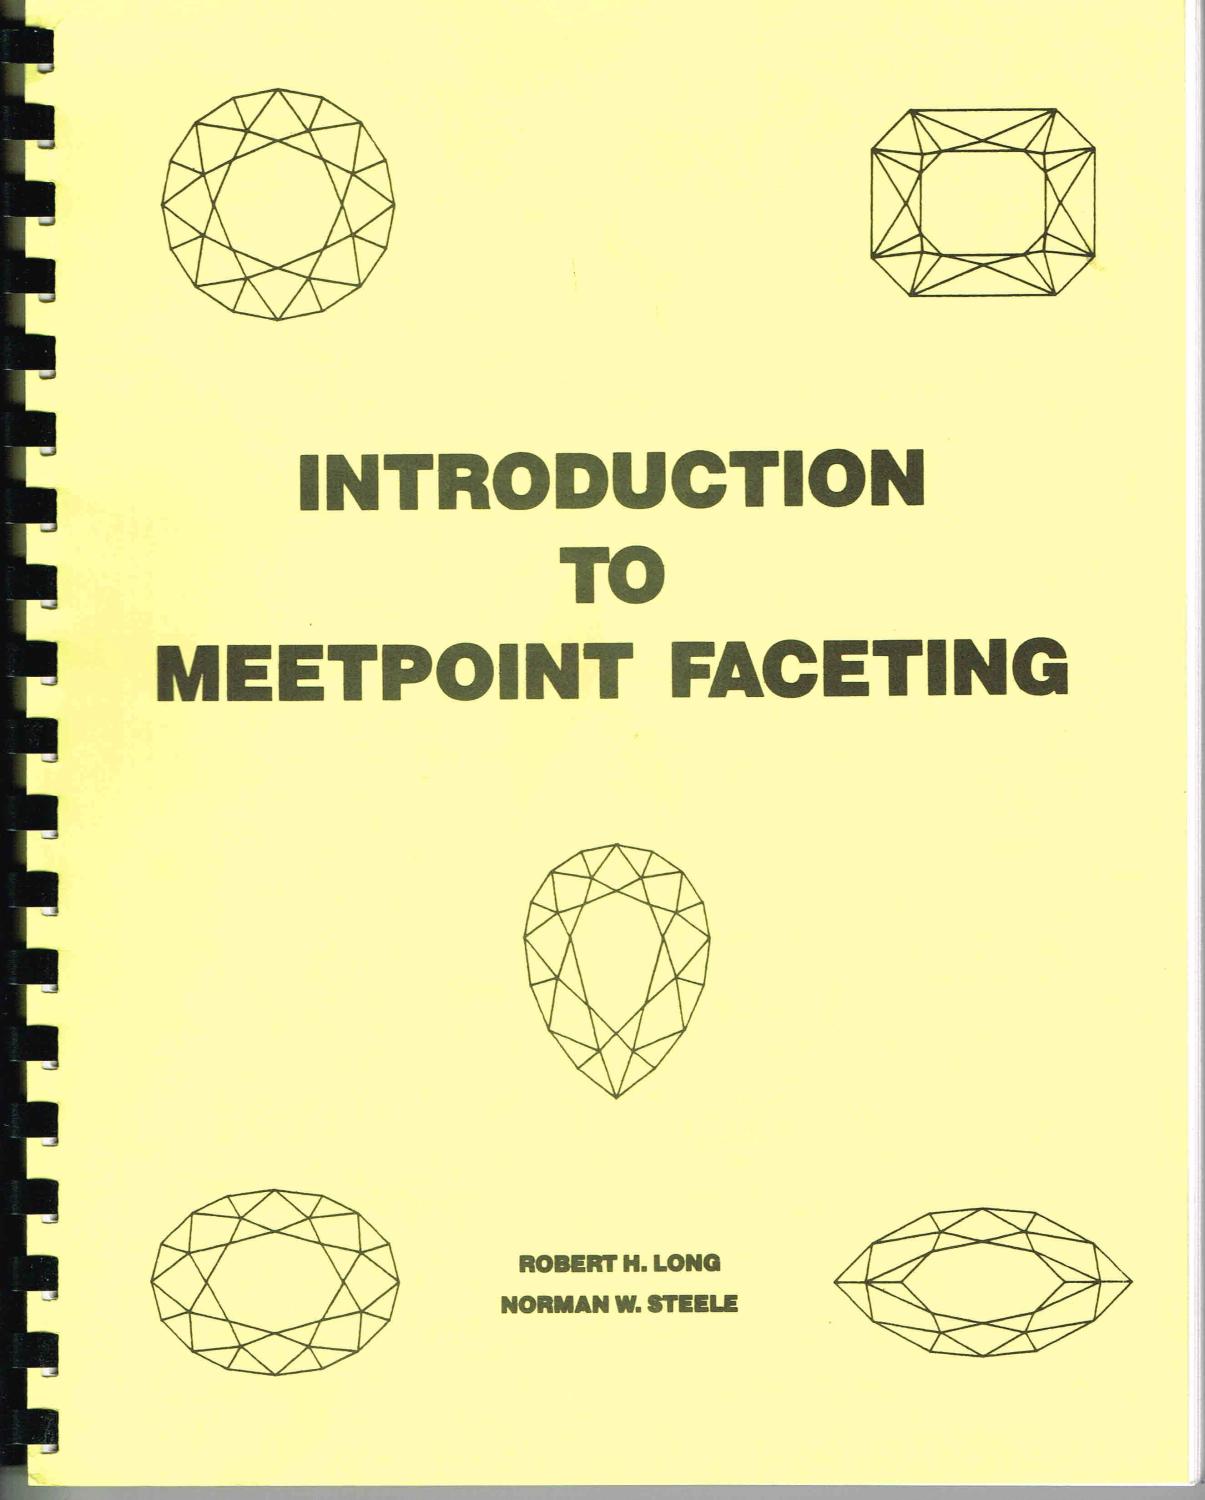 introduction to meetpoint faceting pdf free download